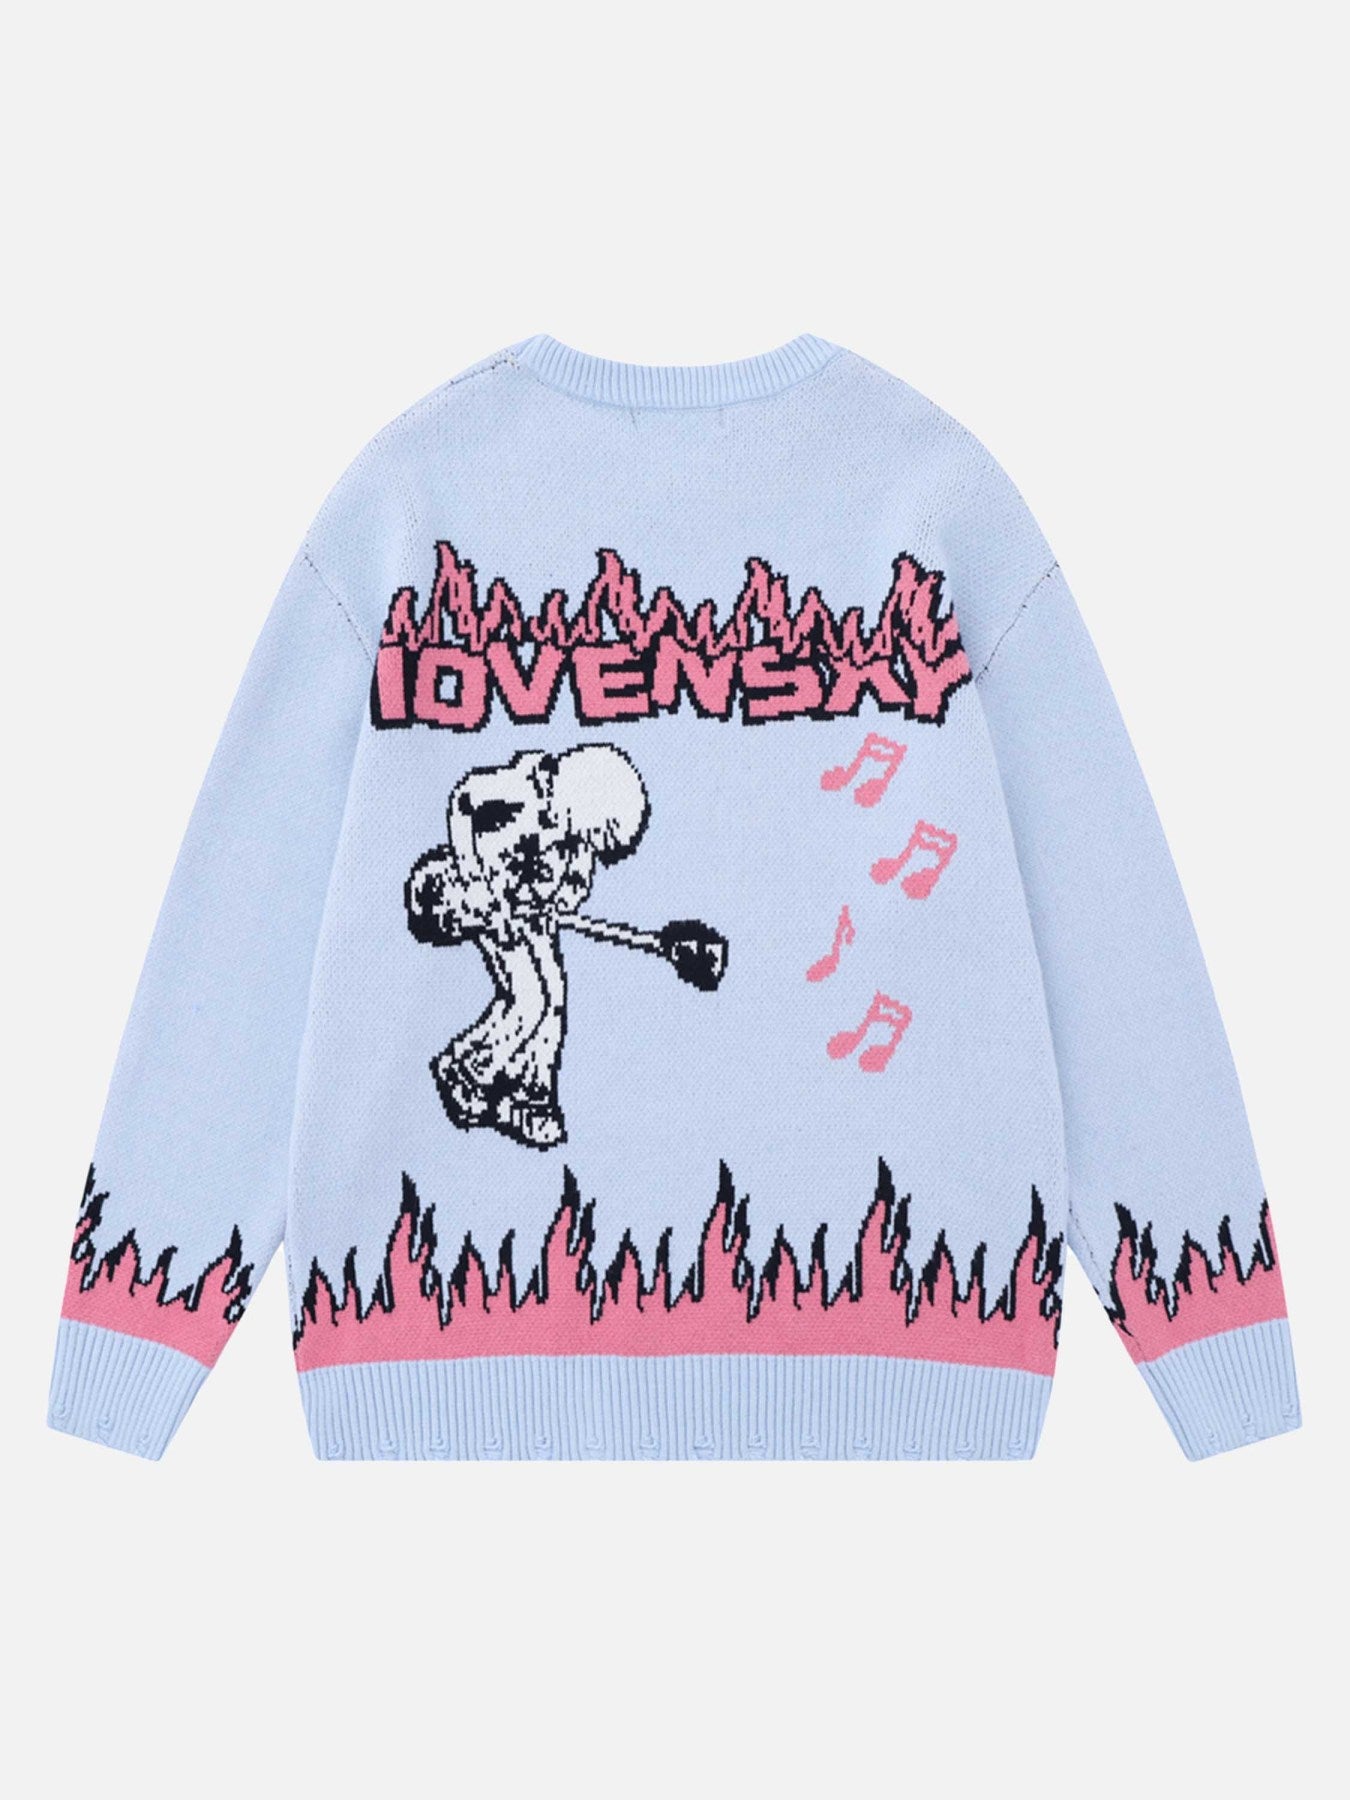 Thesupermade Rock Anime Flame Crew Neck Sweater